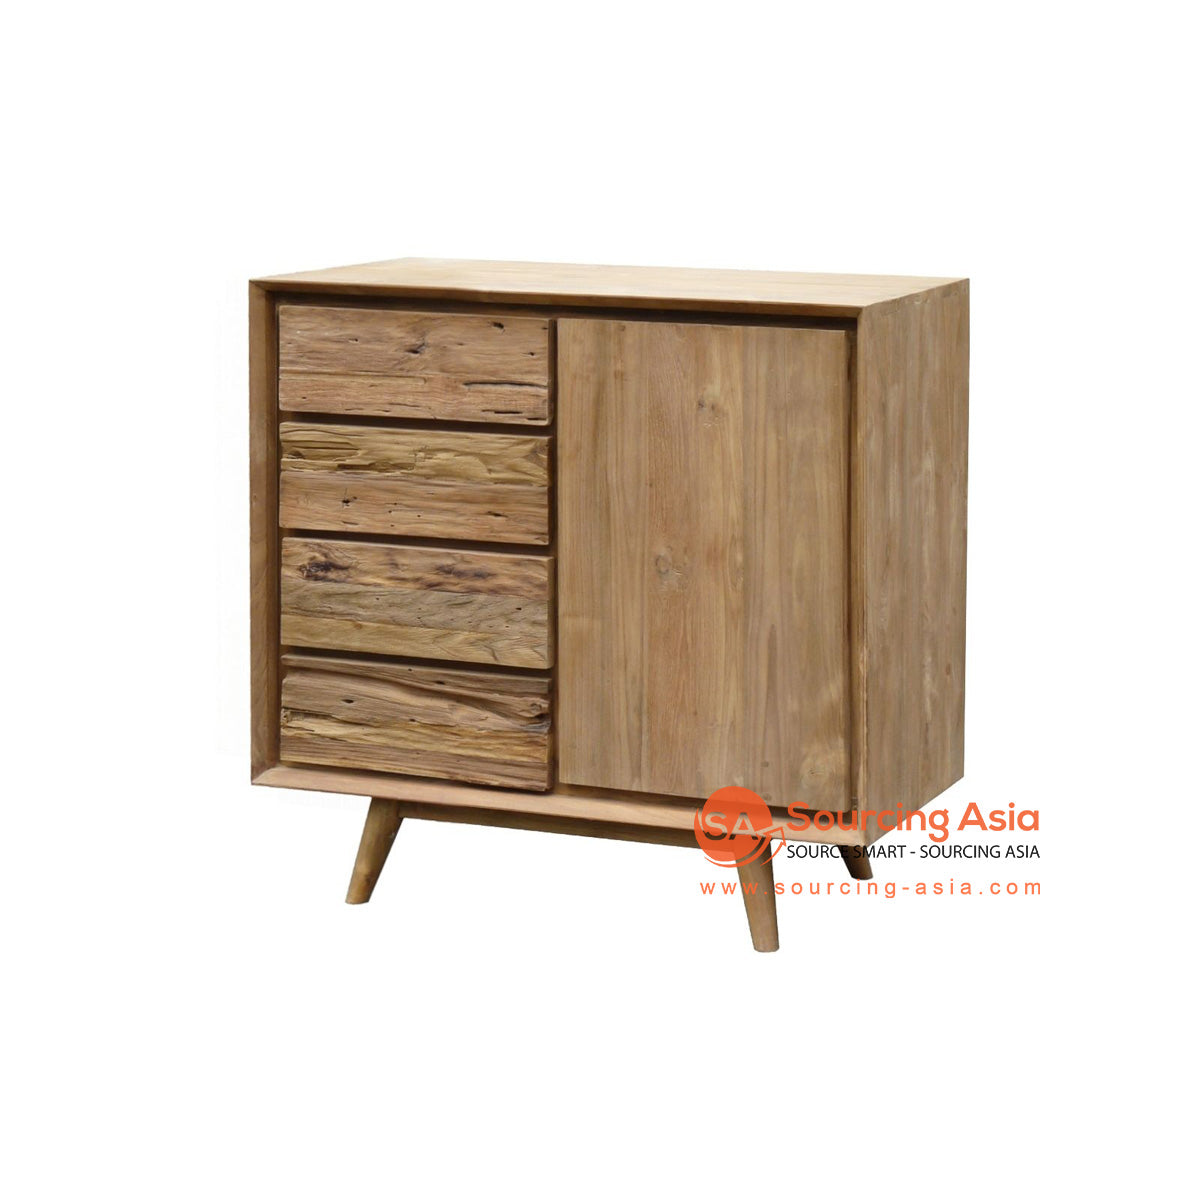 ECL317 NATURAL RECYCLED TEAK WOOD ONE DOOR AND FOUR DRAWERS RUSTIC BUFFET